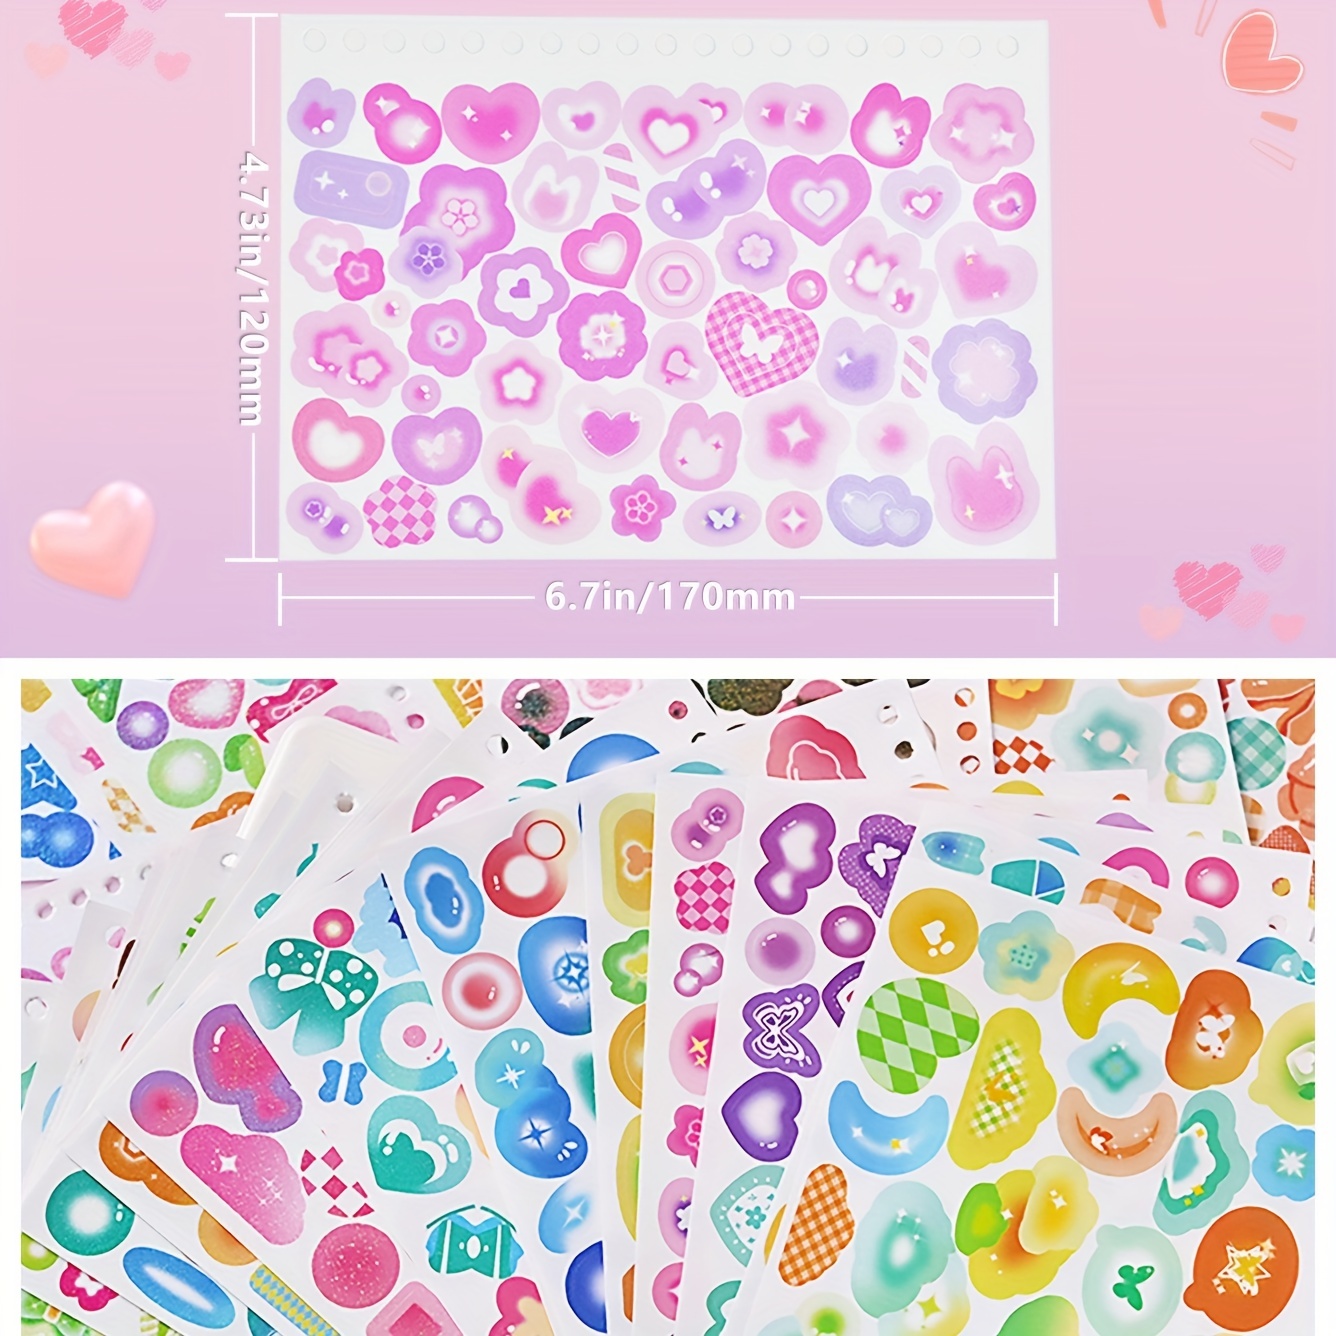 50 Sheets Colorful Photocard Stickers Cute Korean Deco Stickers Kpop  Stickers for Photocards Ribbon Butterfly Heart Cute Stickers for Photocards